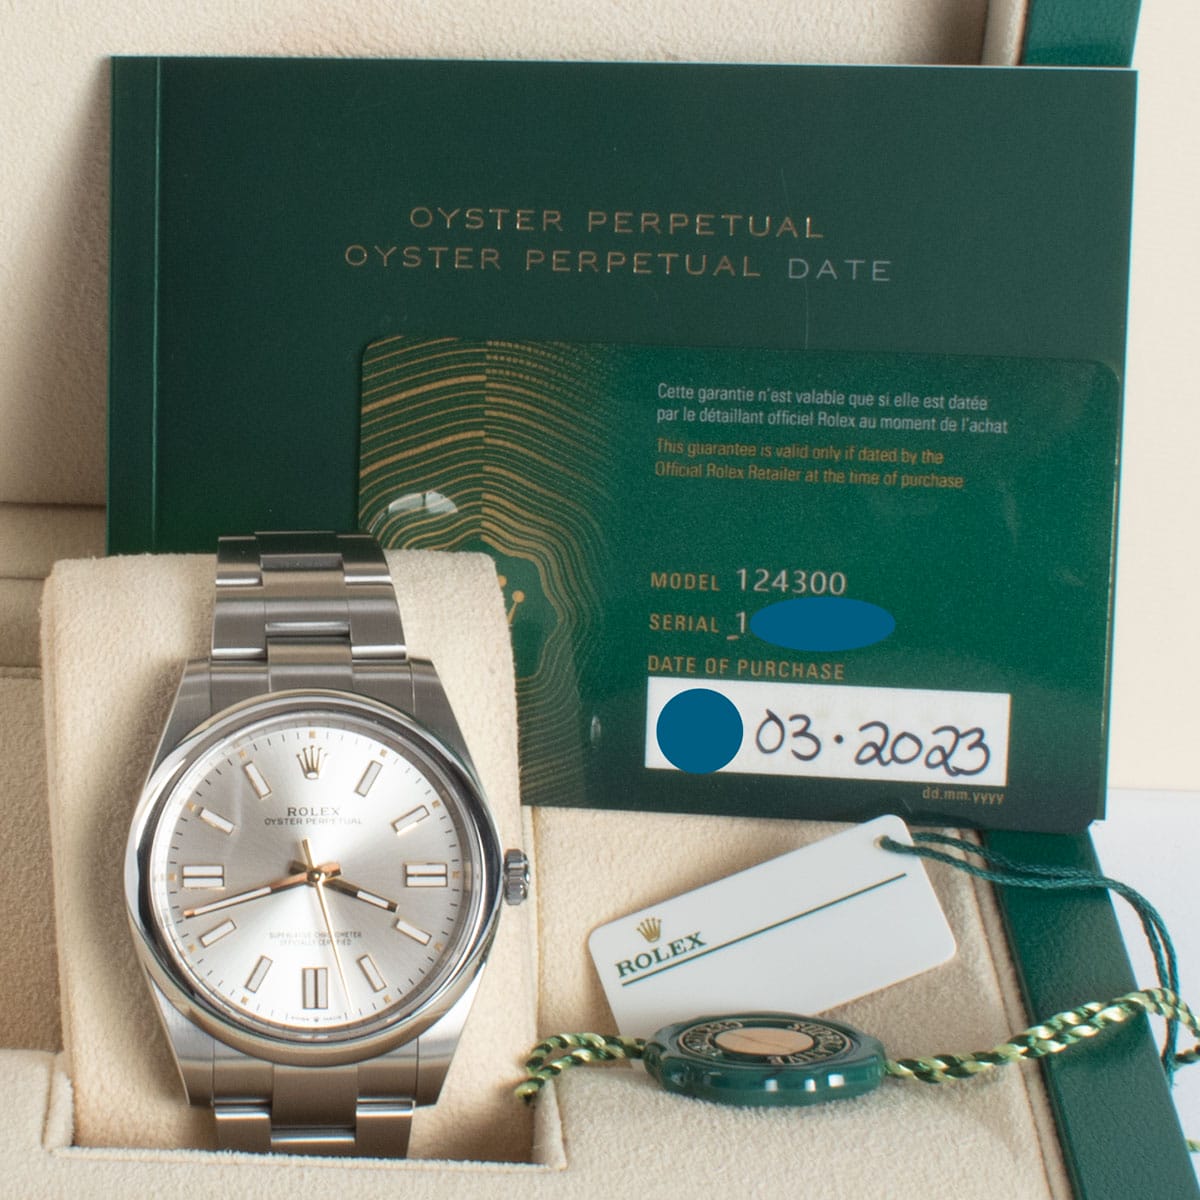 View in Box of Oyster Perpetual 41